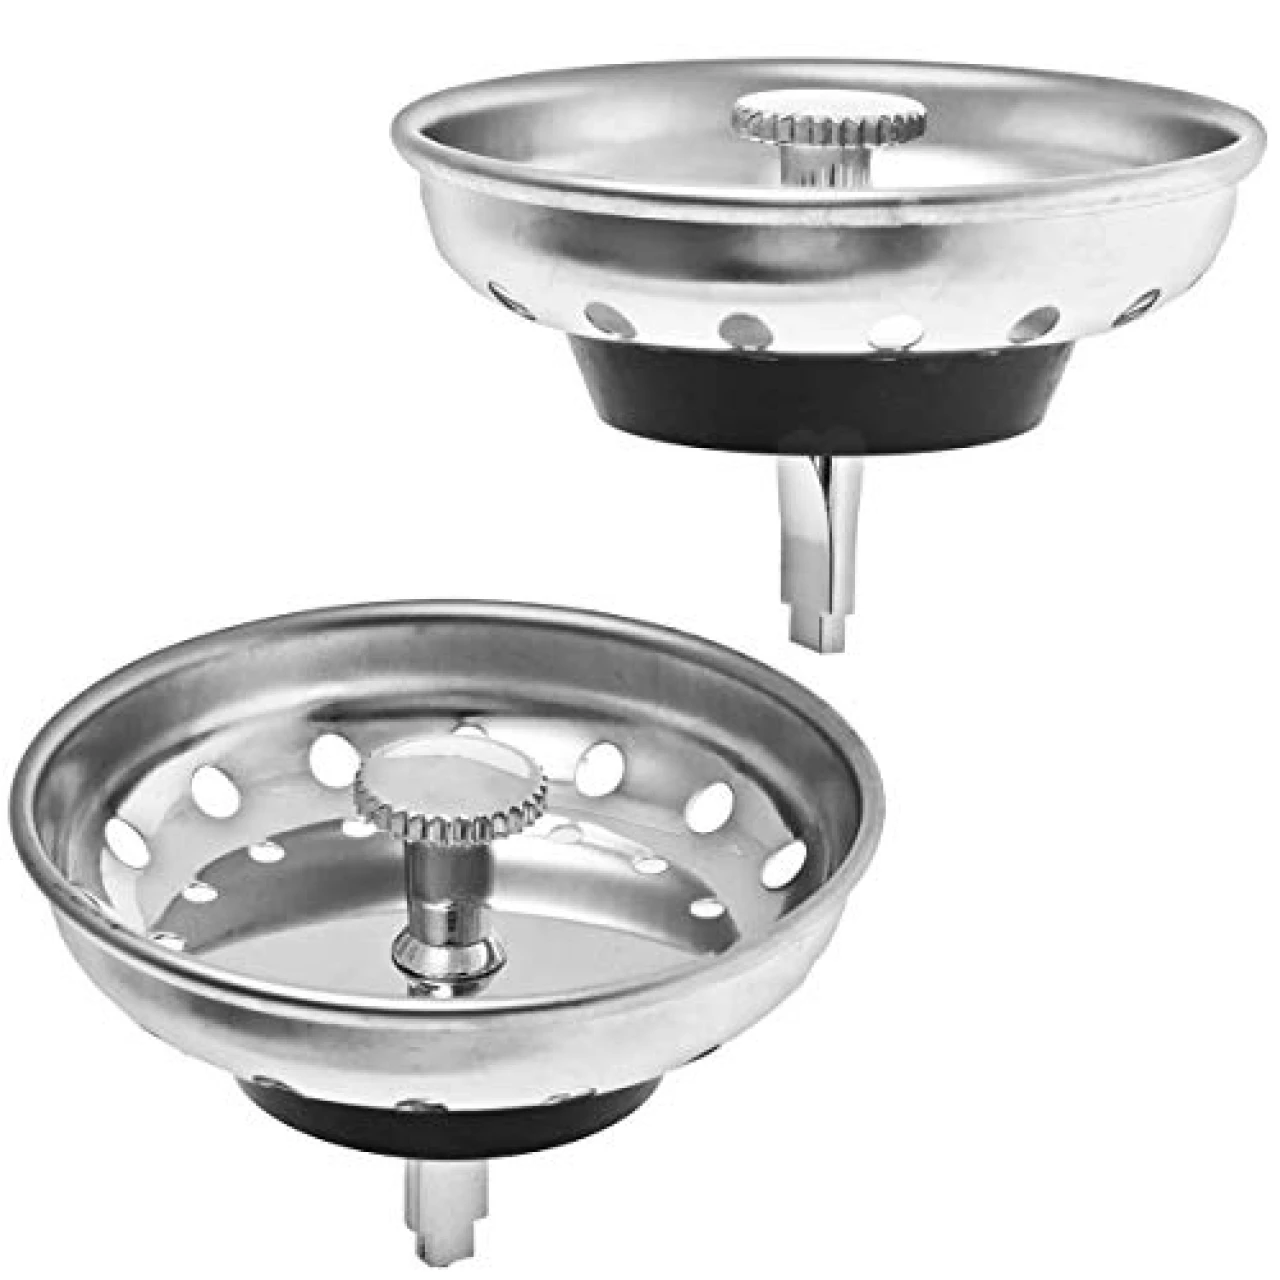 2 Pack - Kitchen Sink Strainer and Stopper Combo Basket Replacement